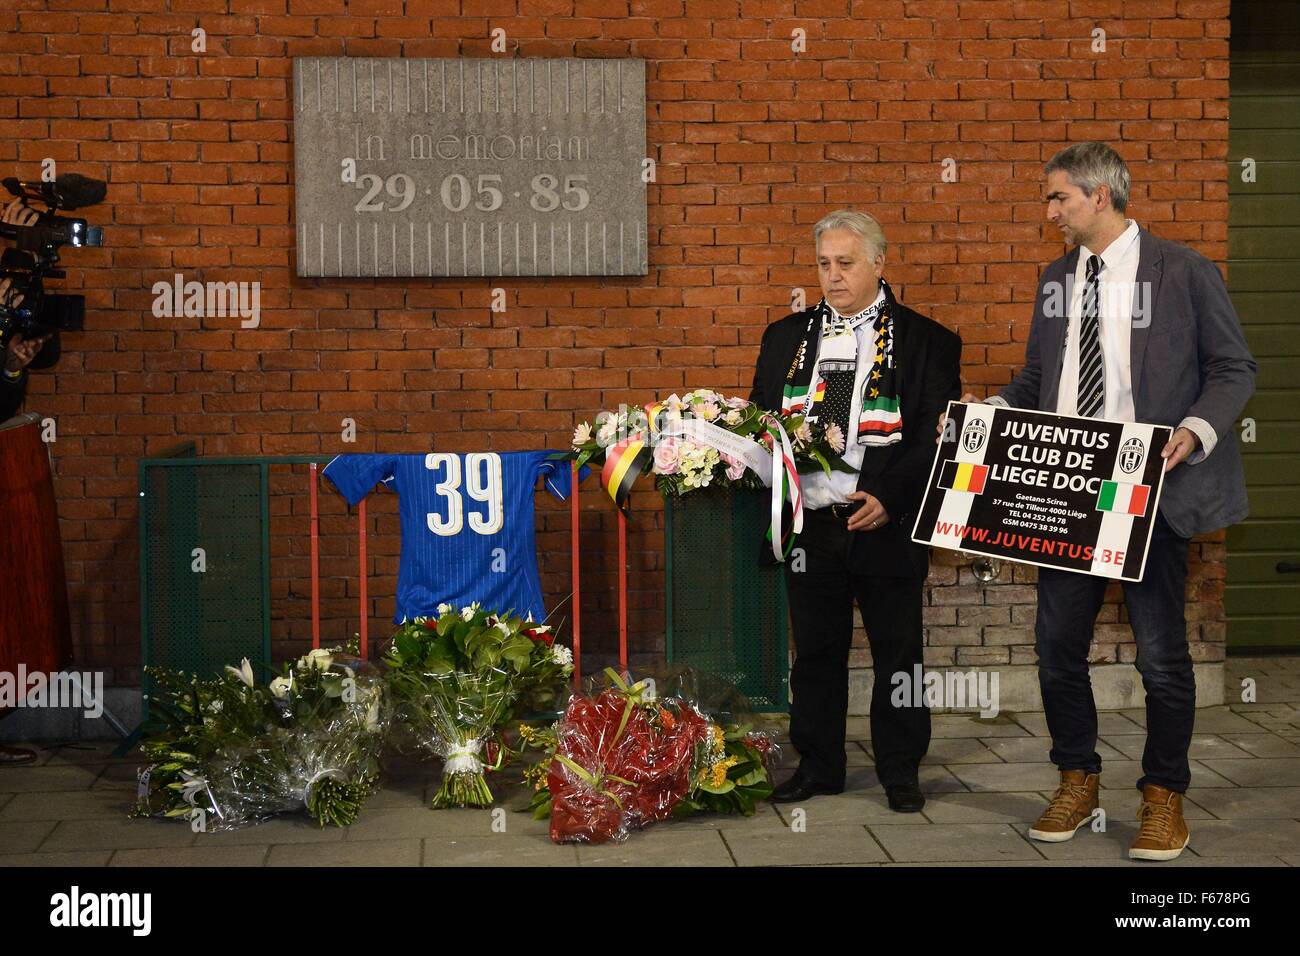 12.11.2015. King Baudouin Stadium (Formerly Heysel Stadium) Brussels, Belgium. The Juventus team visit the location where 39 fans from Liverpool and Juventus were killed during riots at the European cup final in May 1985 (30 years ago).  Suppoters of Juventus place flowers at the memorial during a commemoration of the Heysel Stadium disaster 30 years ago Stock Photo